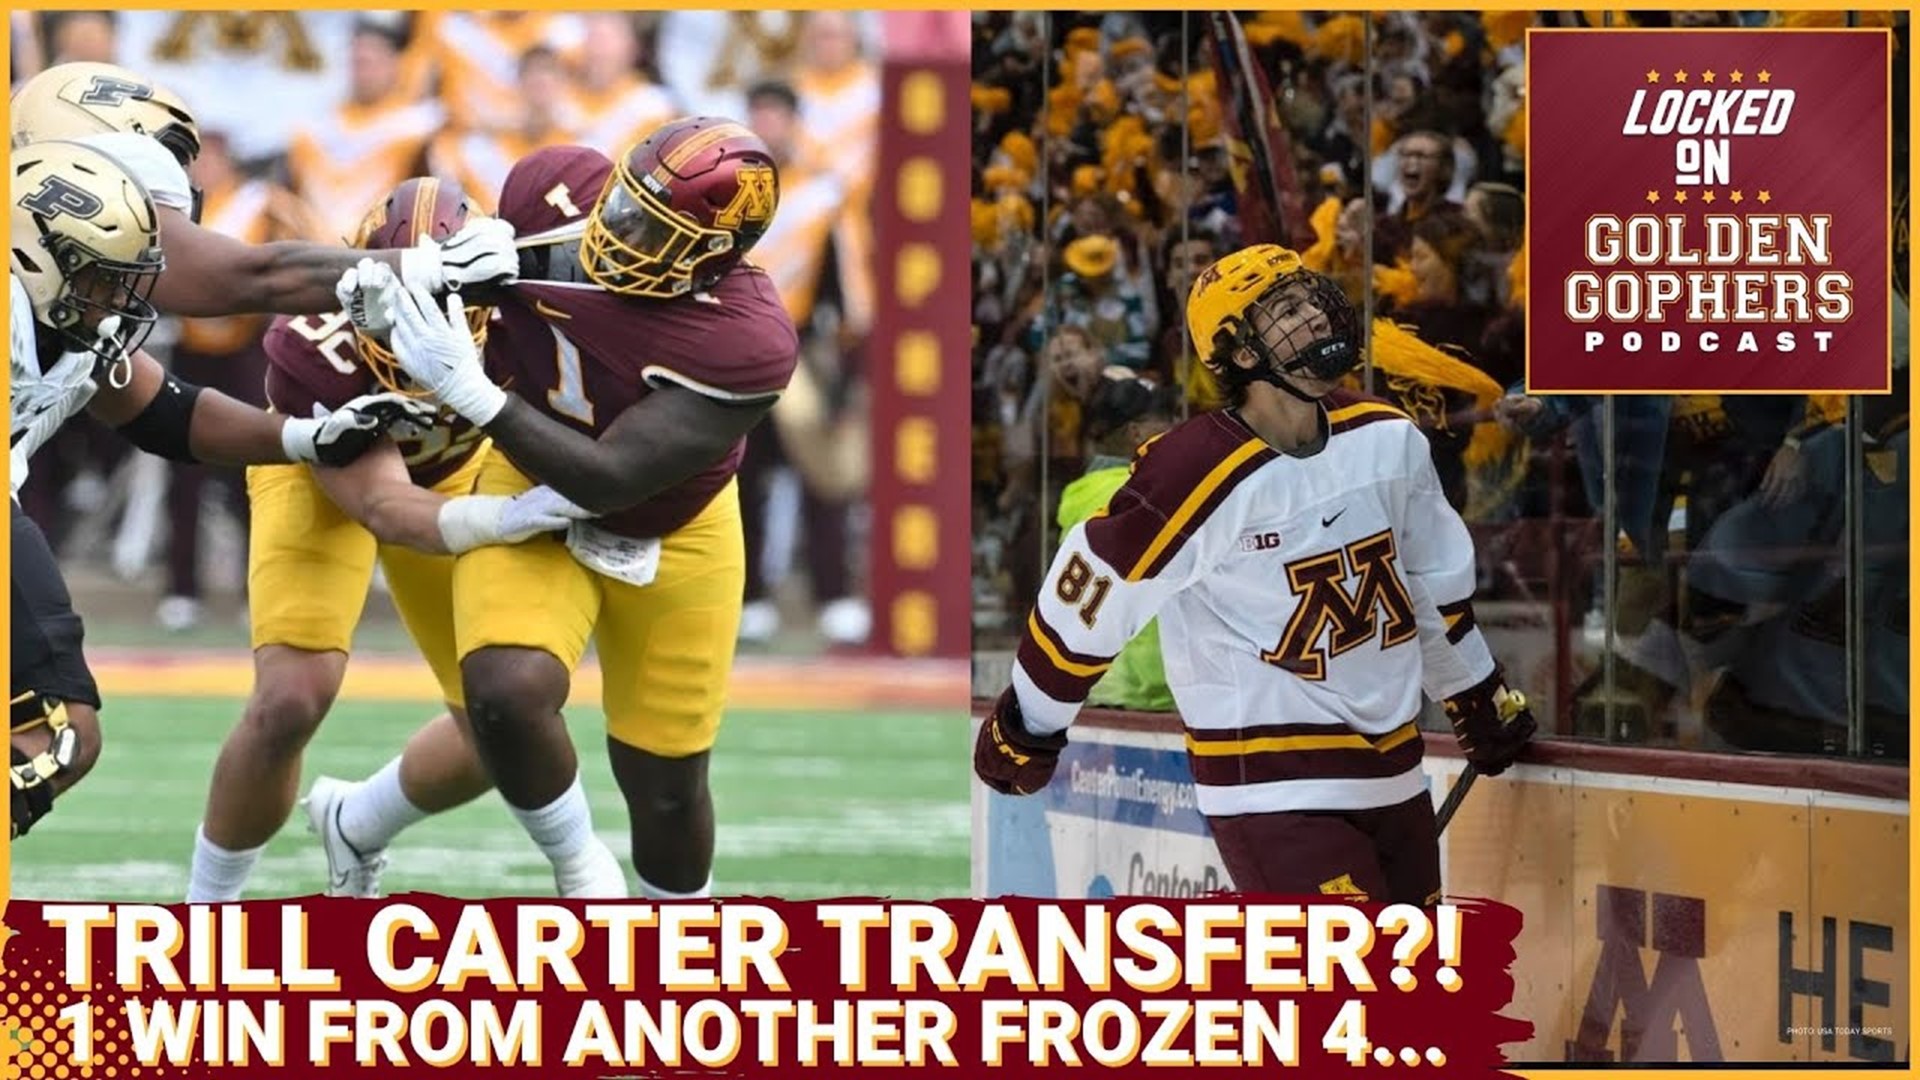 Today we discuss yet another transfer portal departure for Gophers sports.